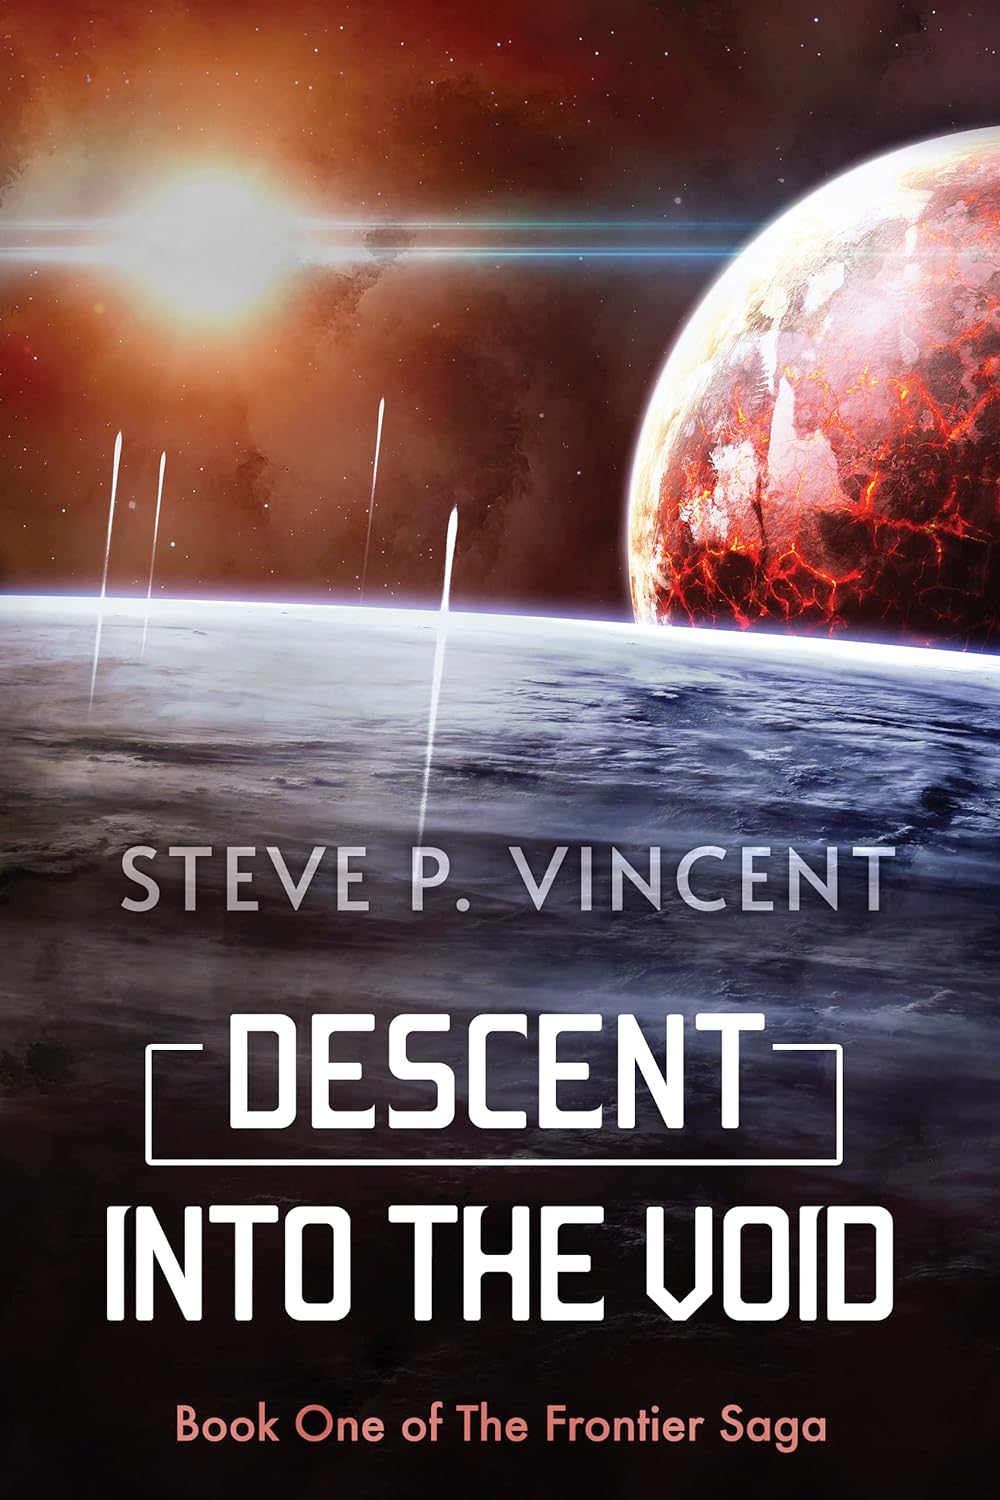 Descent into the Void Action Packed Science Fiction Adventure by Bestselling Author Steve P Vincent